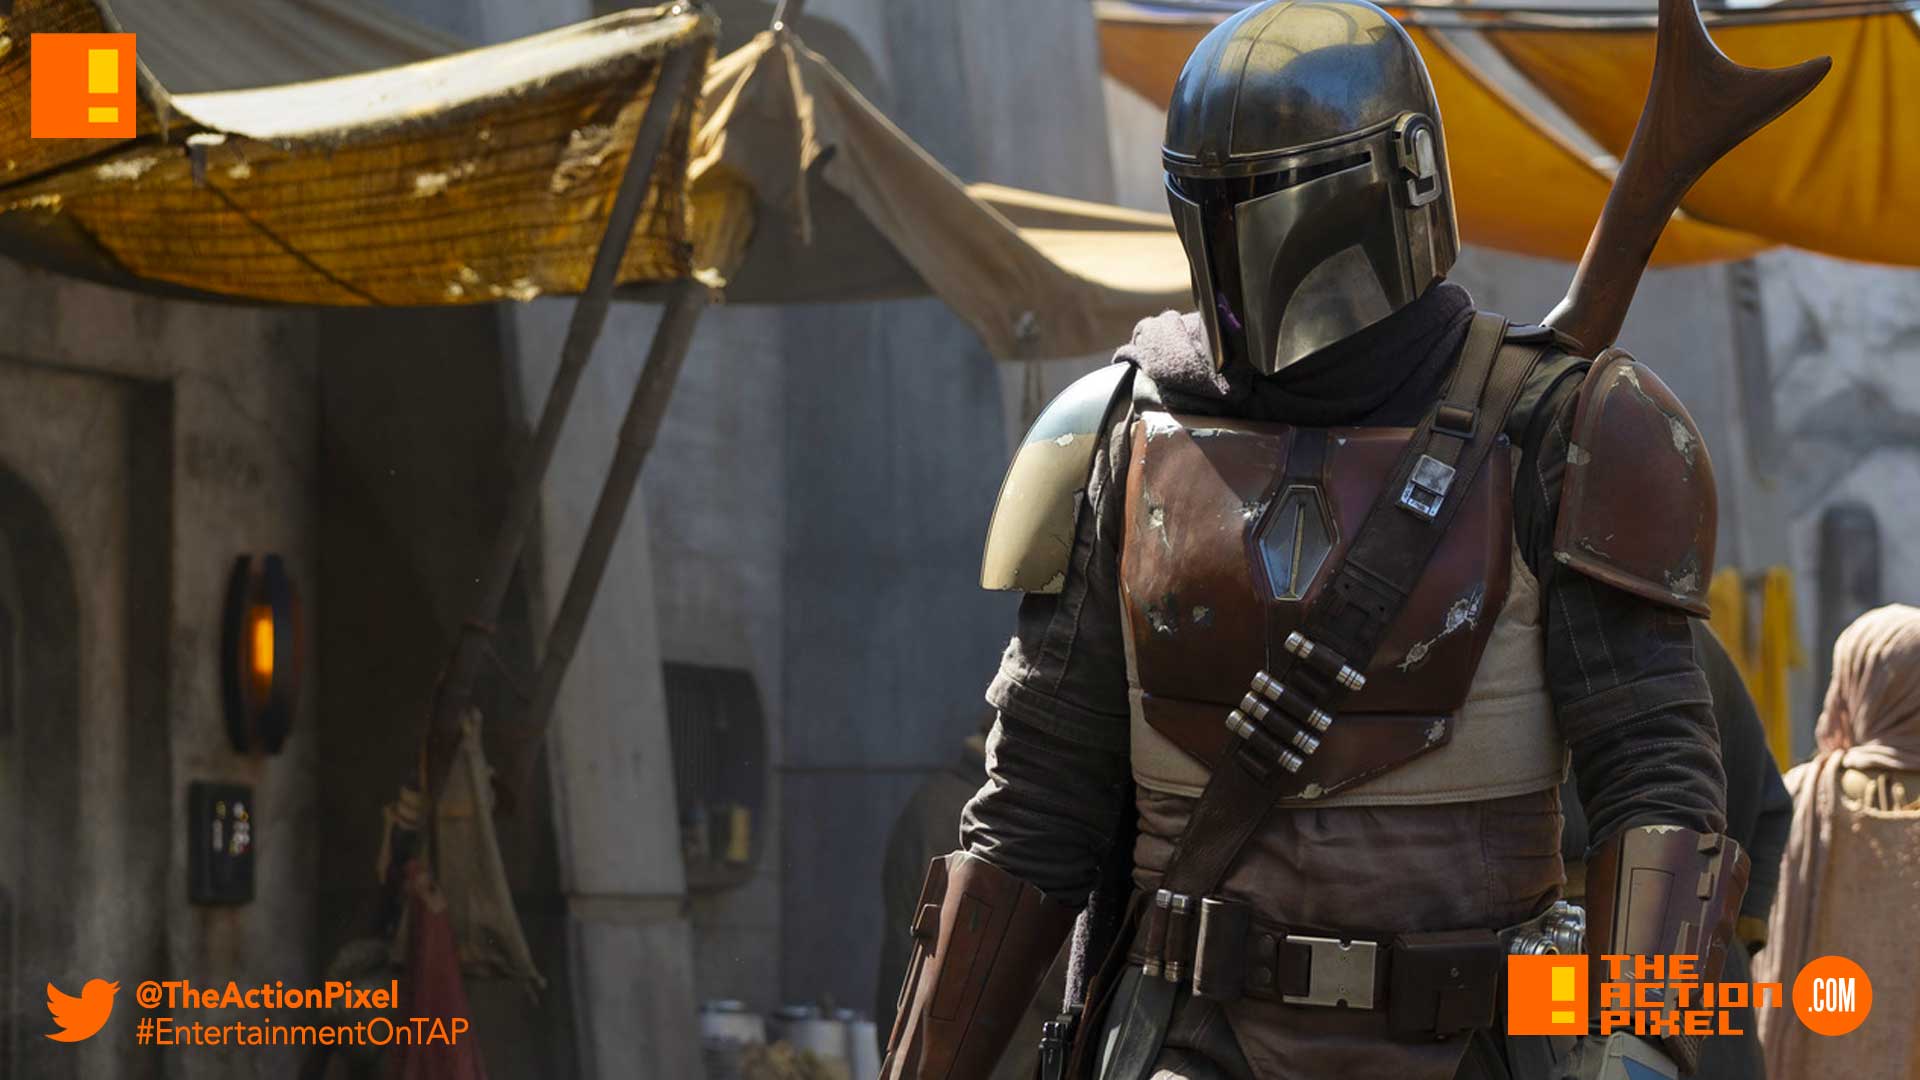 star wars,mandalorian, live-action tv series, the action pixel, entertainment on tap,